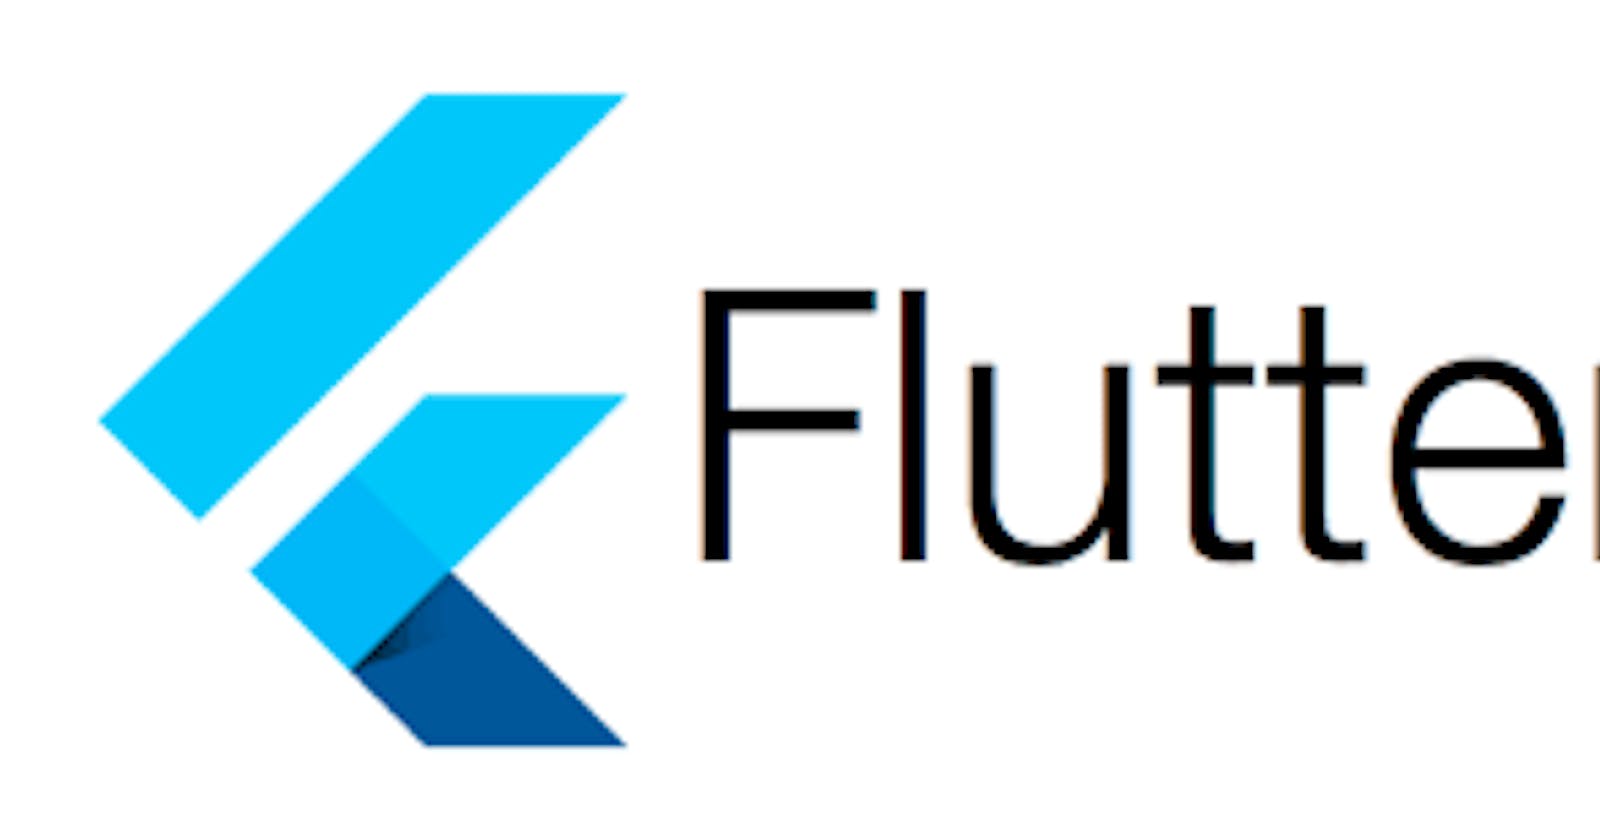 Roadmap to developing with "Flutter"